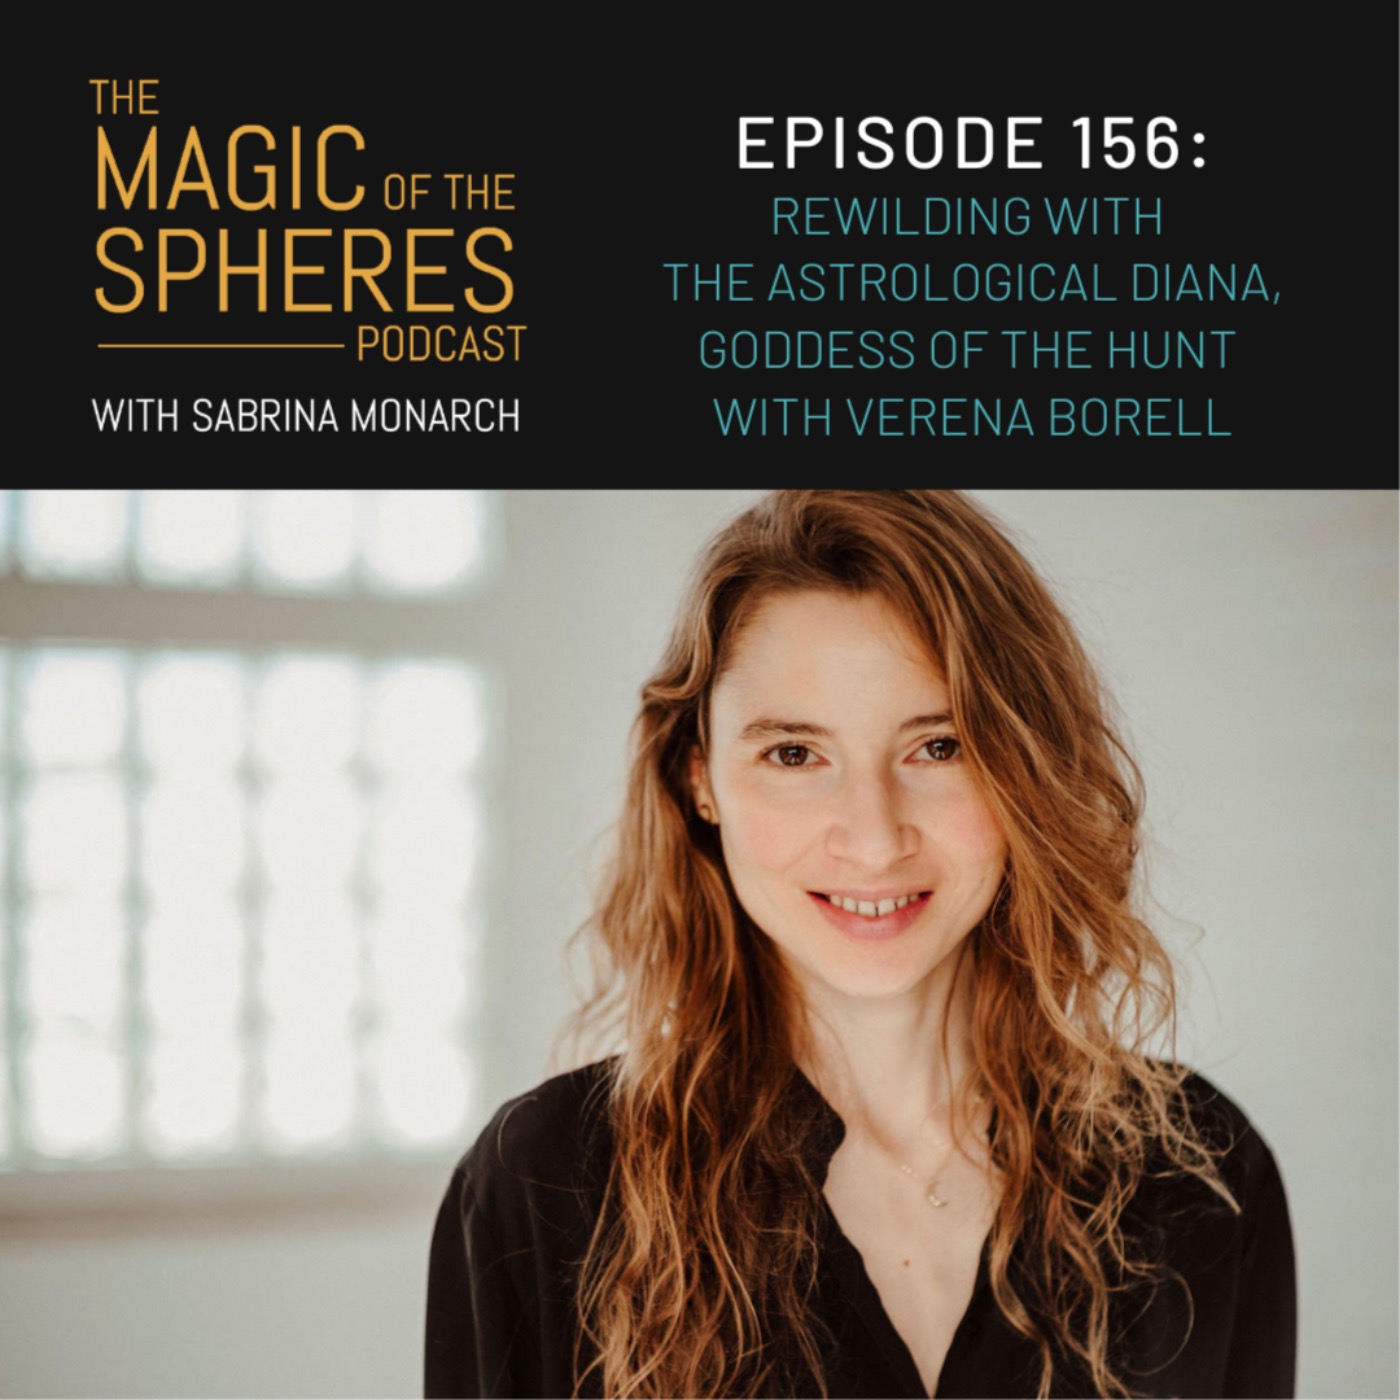 Rewilding with the Astrological Diana, Goddess of the Hunt with Verena Borell